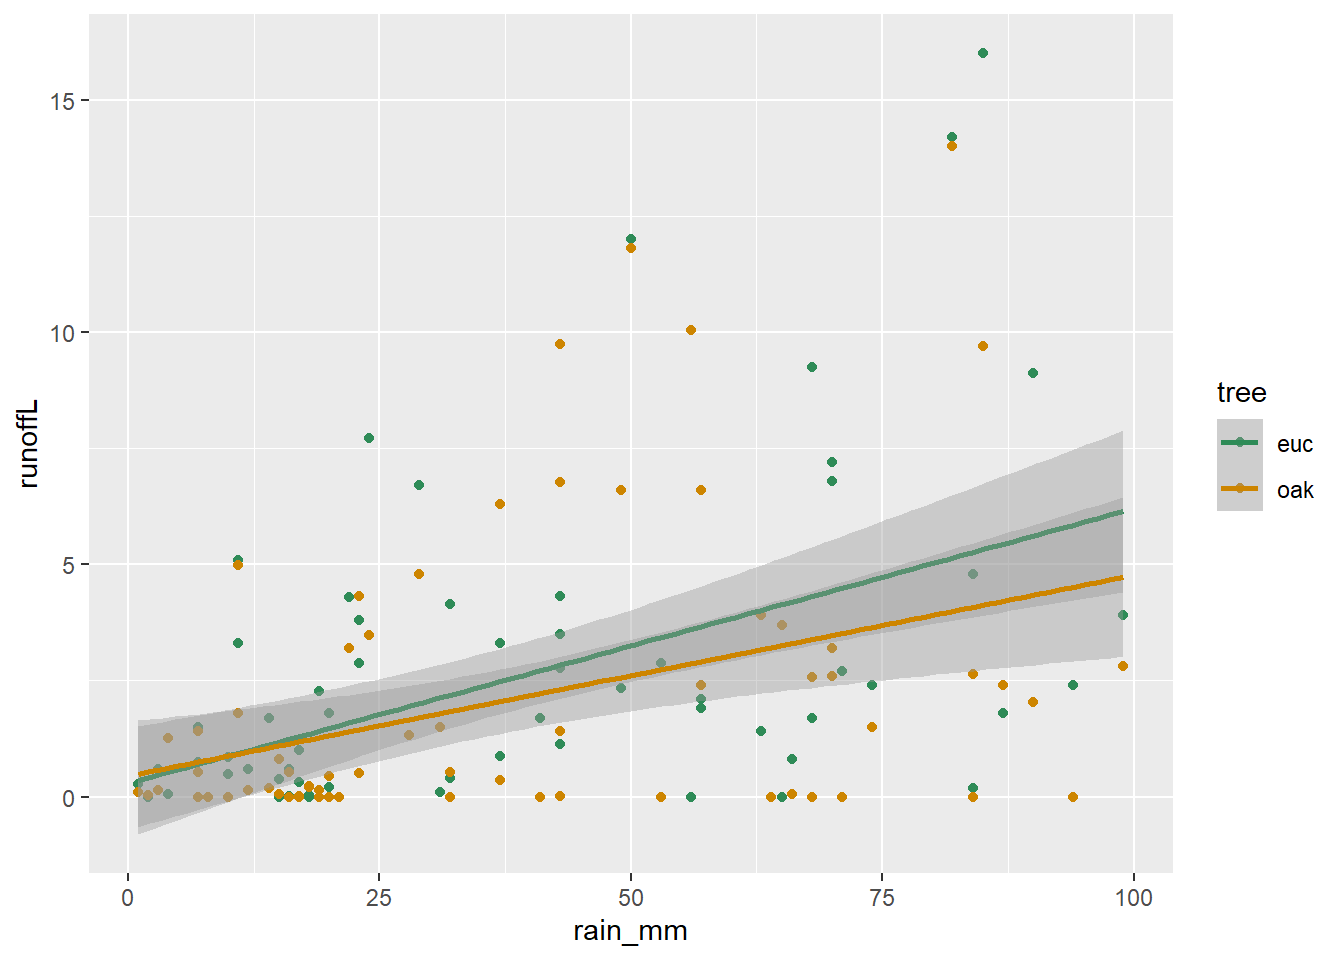 Runoff/rainfall scatterplot colored by tree, created by pivot and binding rows